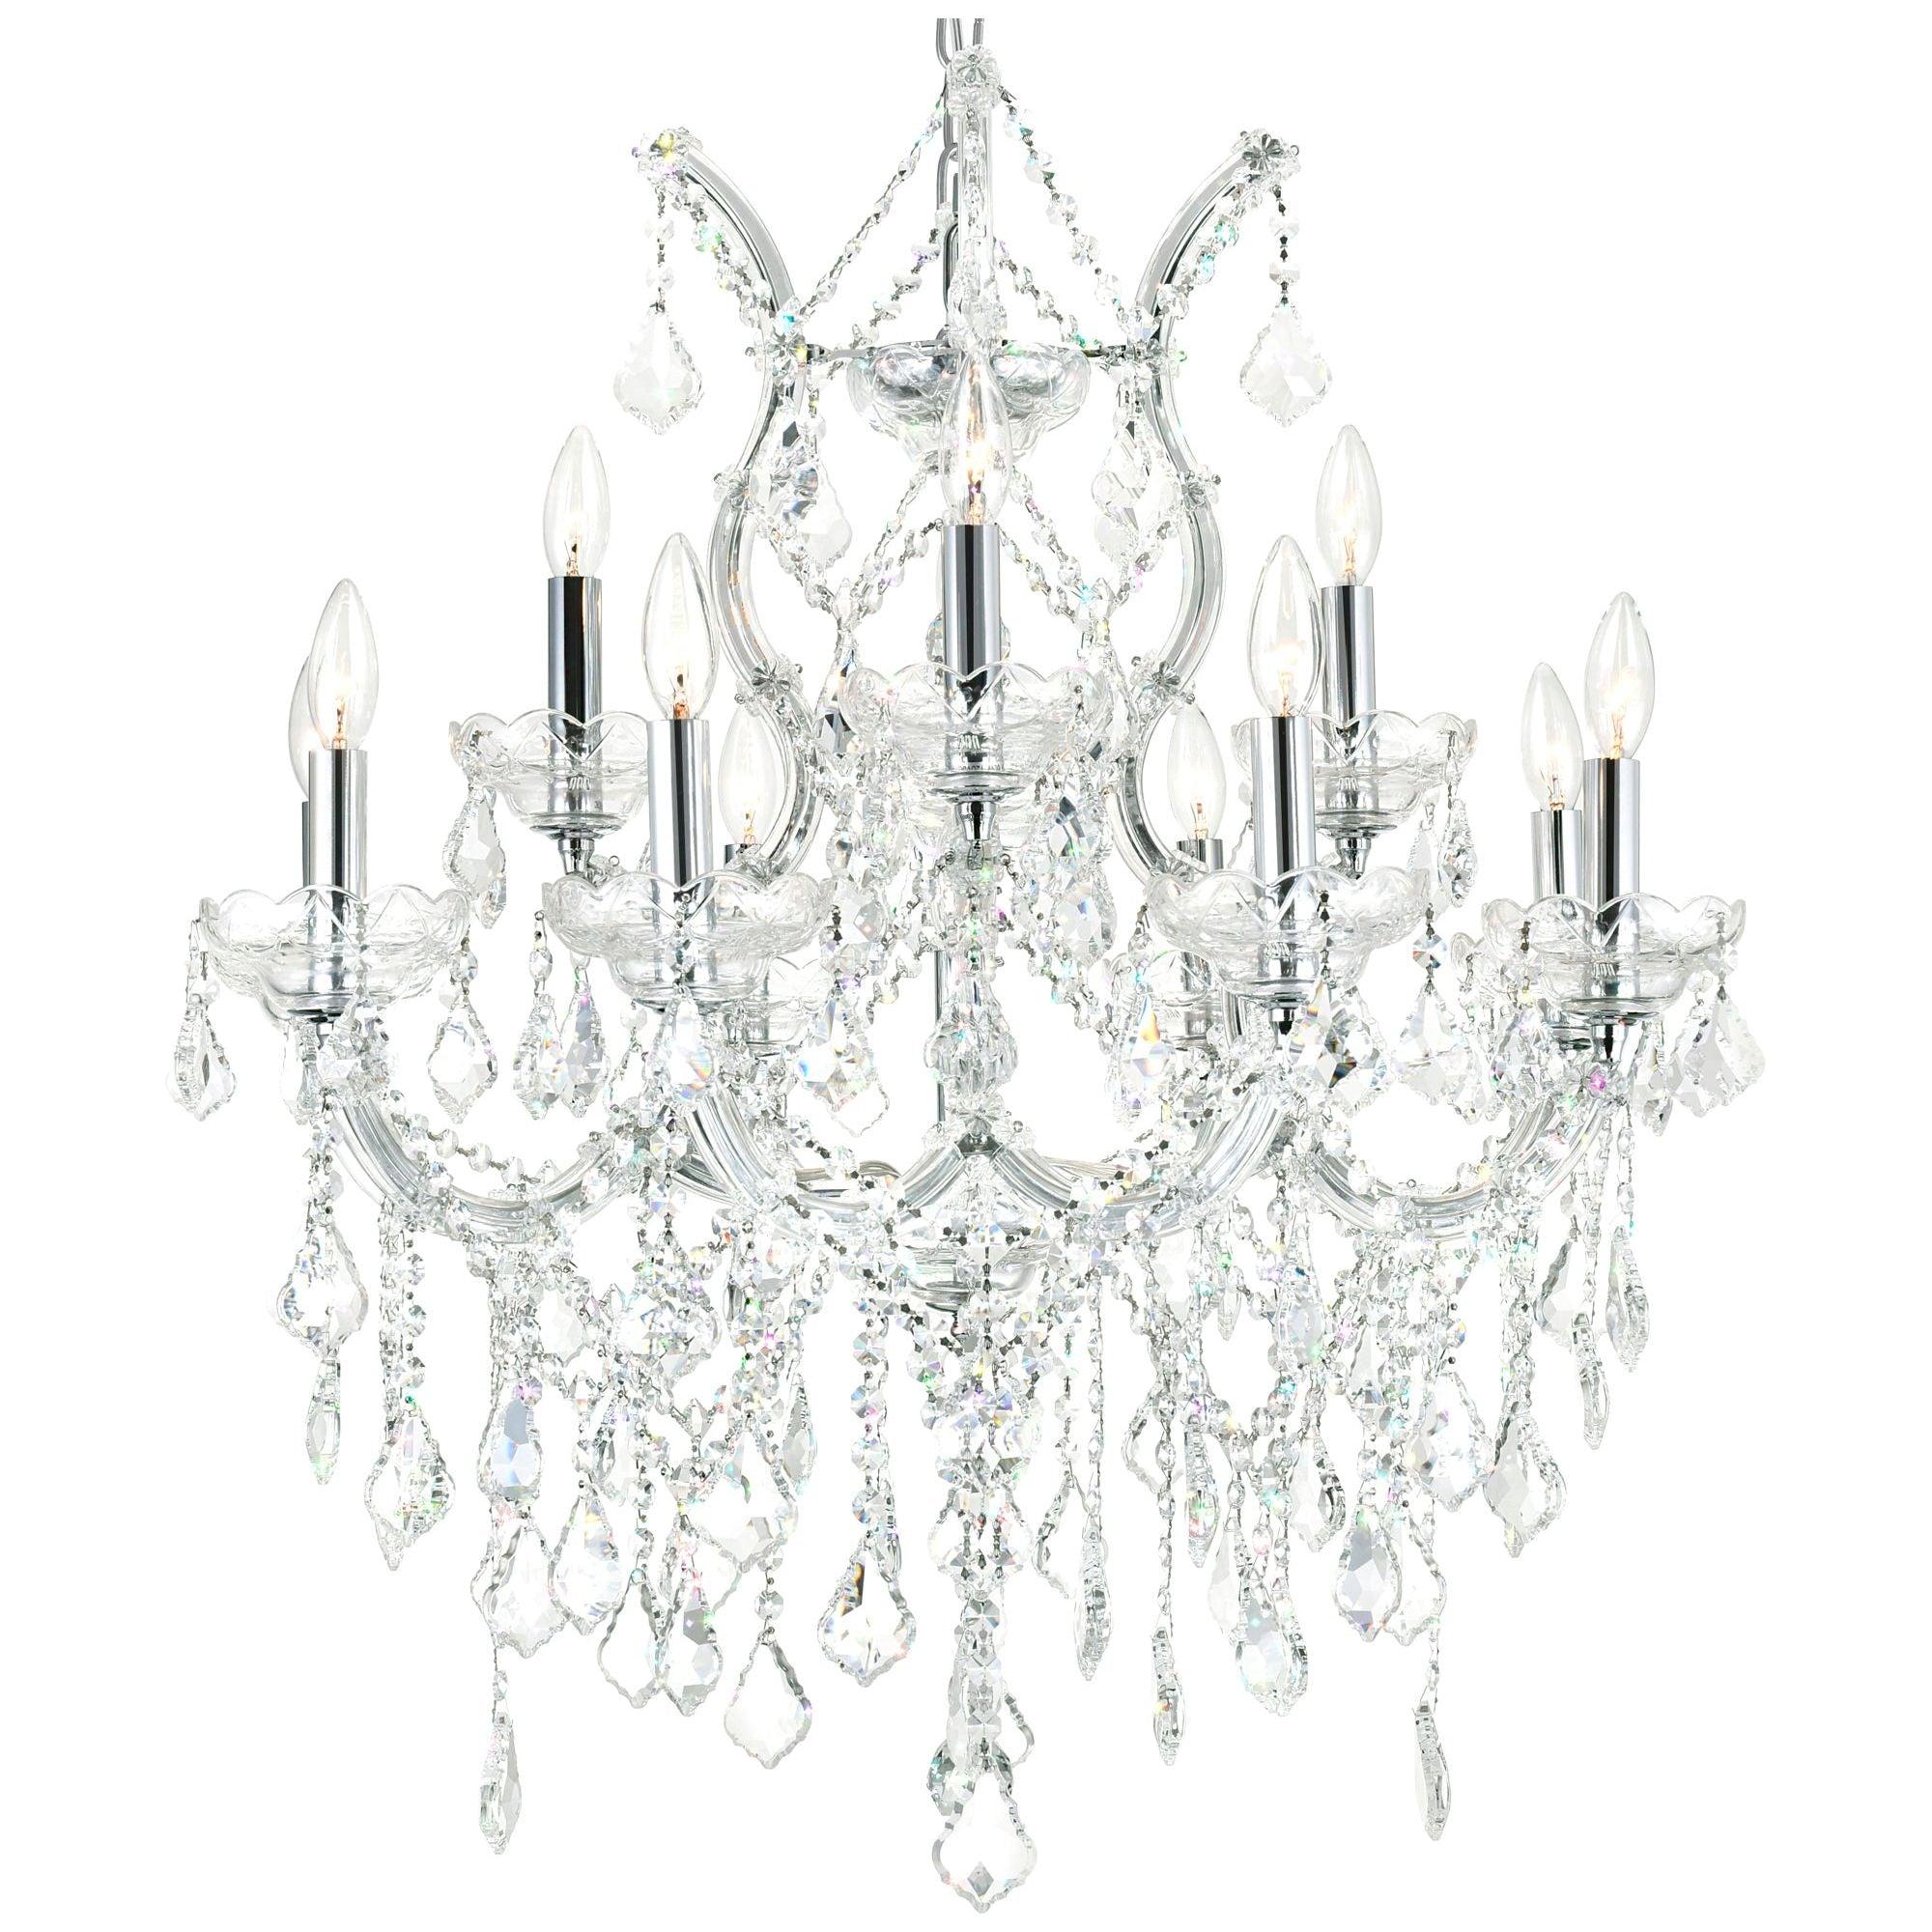 CWI - Maria Theresa Chandelier - Lights Canada